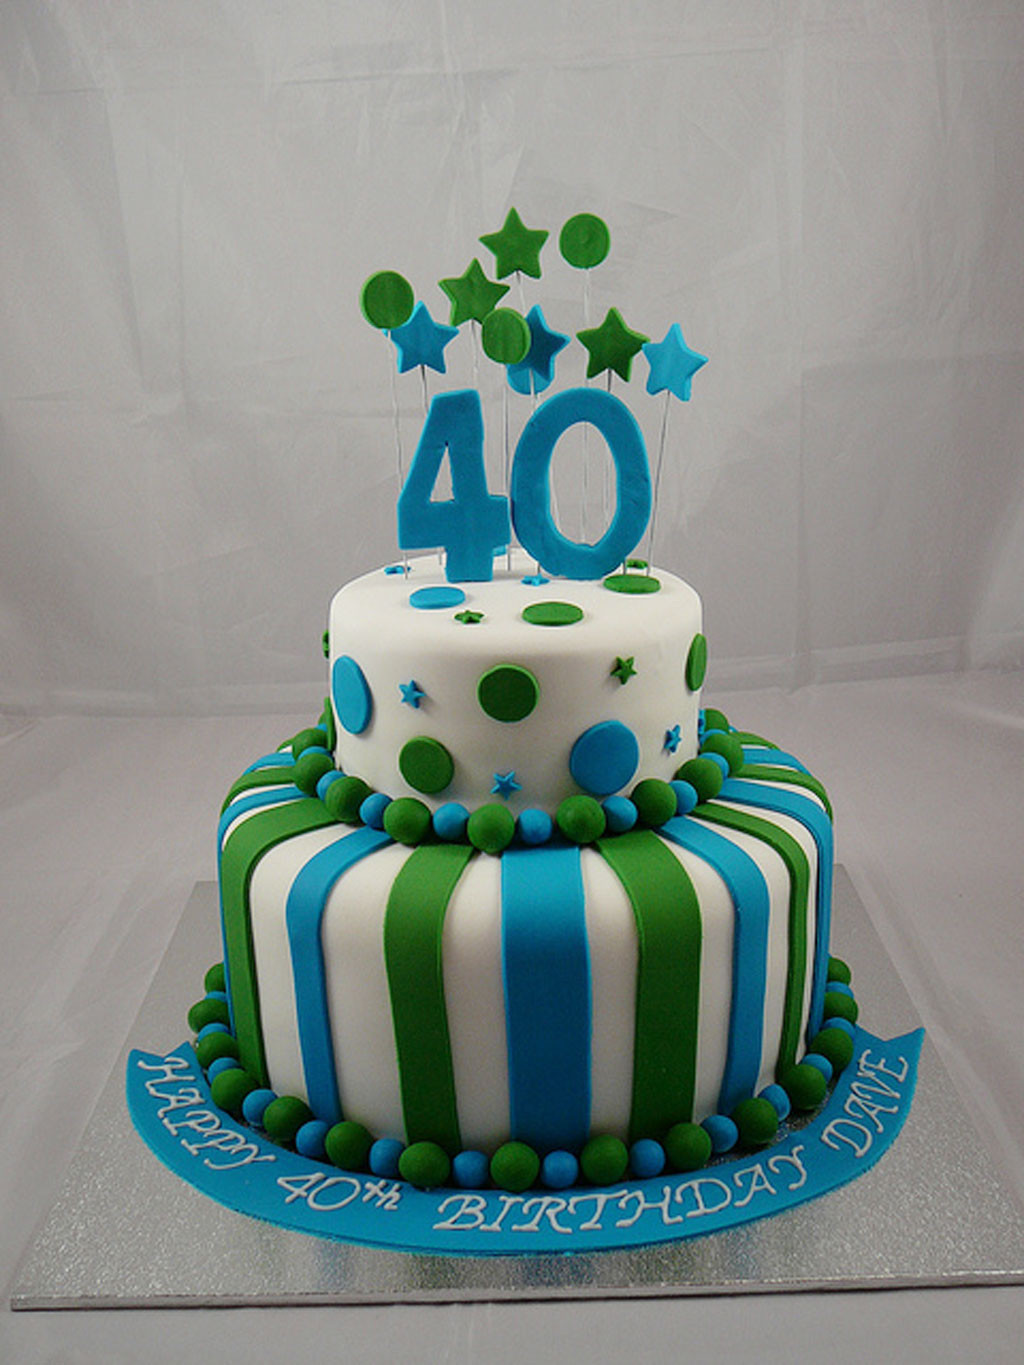 Pictures Of Birthday Cakes For Men
 40th Birthday Cake For Men Birthday Cake Cake